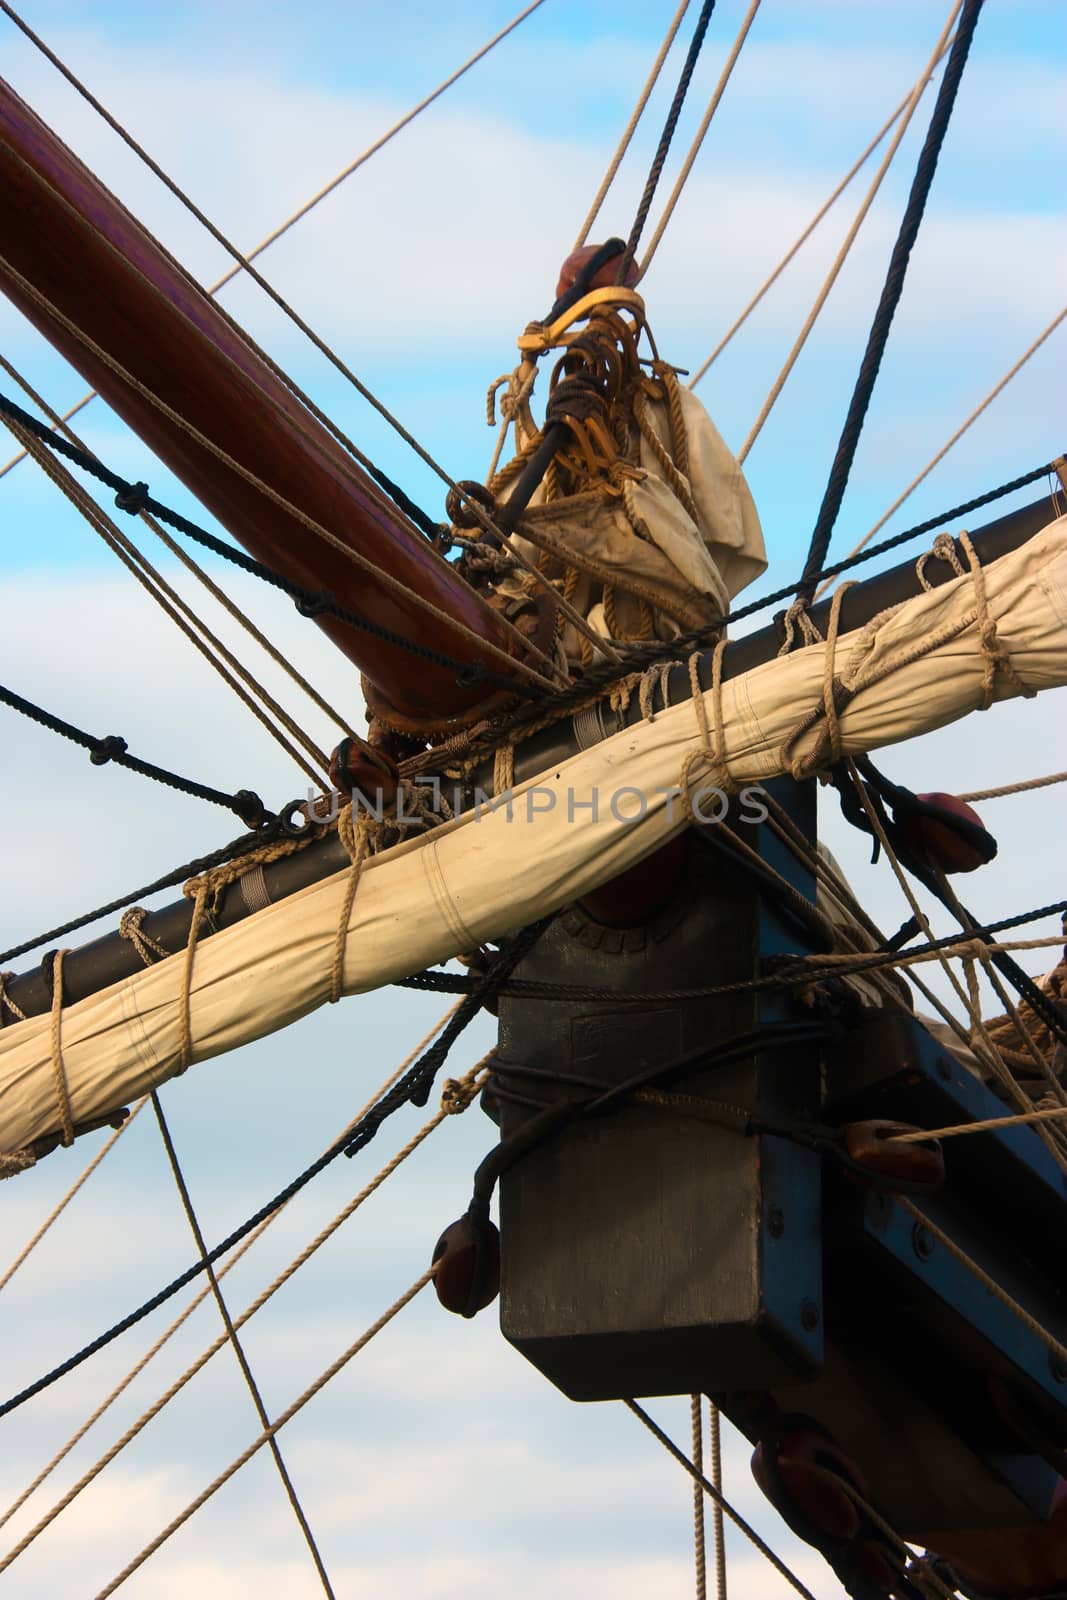 Bowsprit, rigging and furled sail of an old sailing ship by definitearts